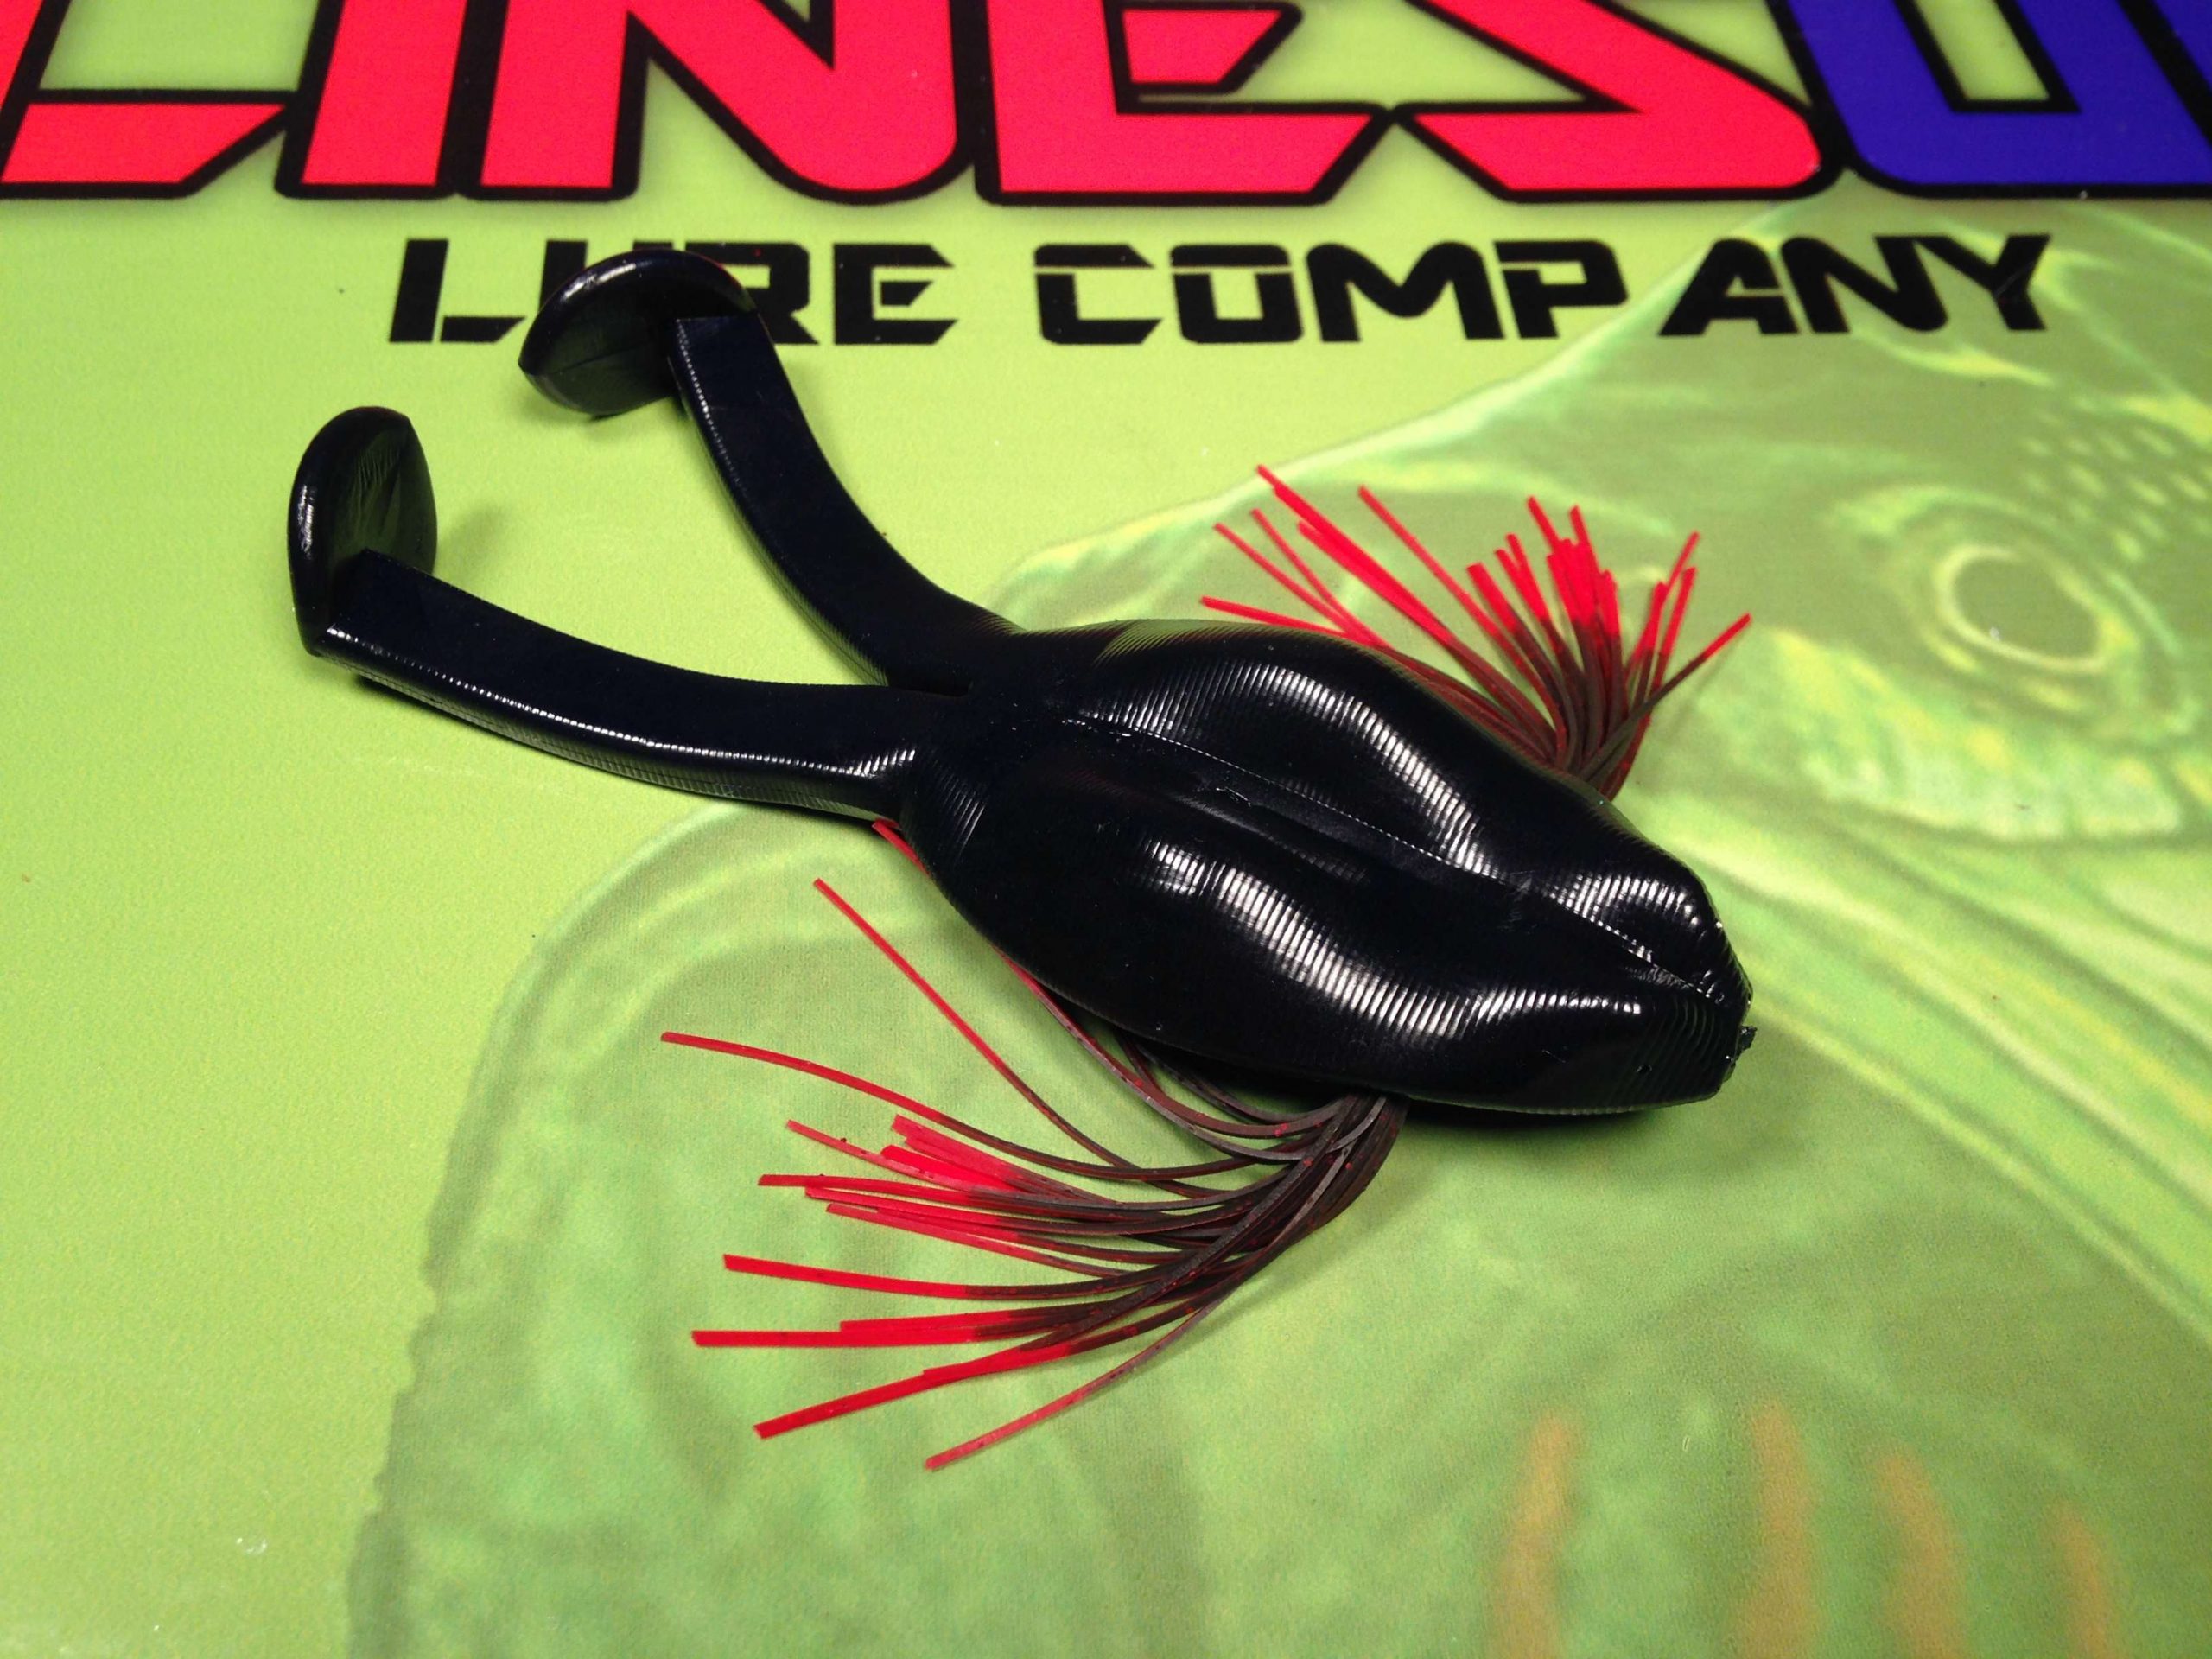 <b>Tightlines UV</b><br>
Flair'N Frog<br>
This new 5" "big target" frog is built with whiskers designed to fan out as you stop it. As you work the bait slow, the whiskers fold up to give the appearance of a swimming frog. Available in 13 different colors.